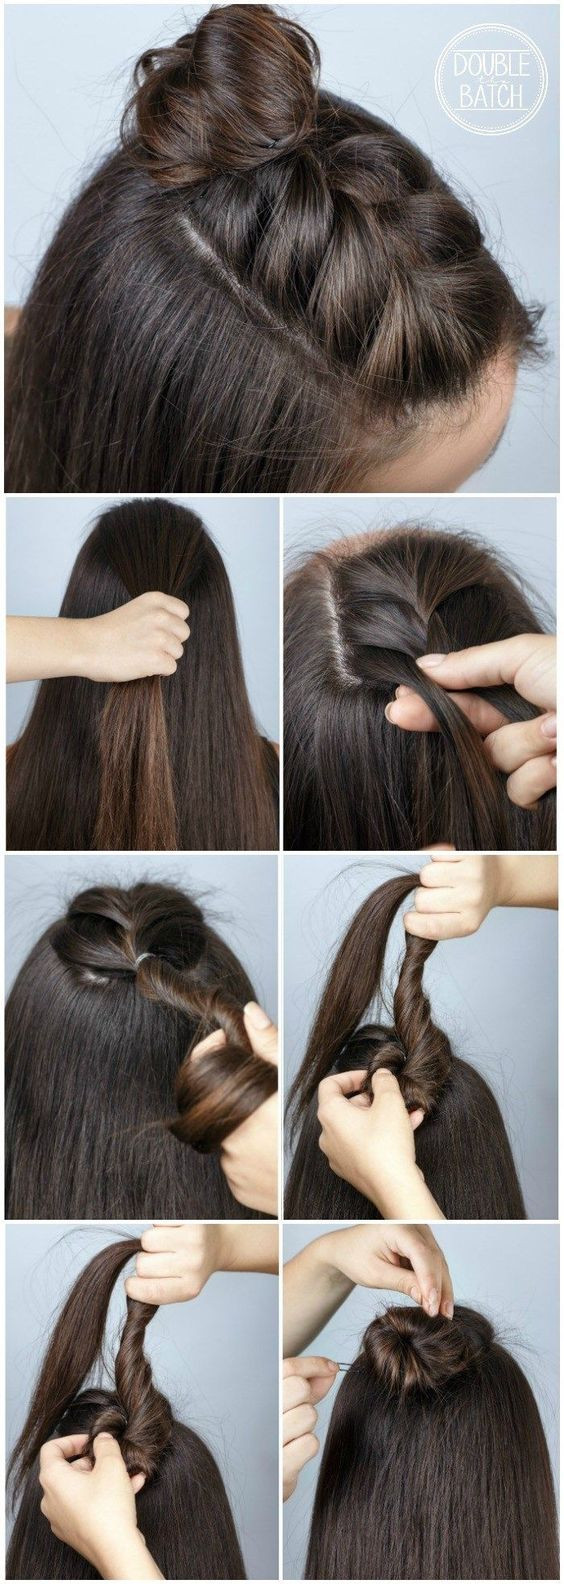 Hairstyle Easy To Do
 22 Quick and Easy Back to School Hairstyle Tutorials